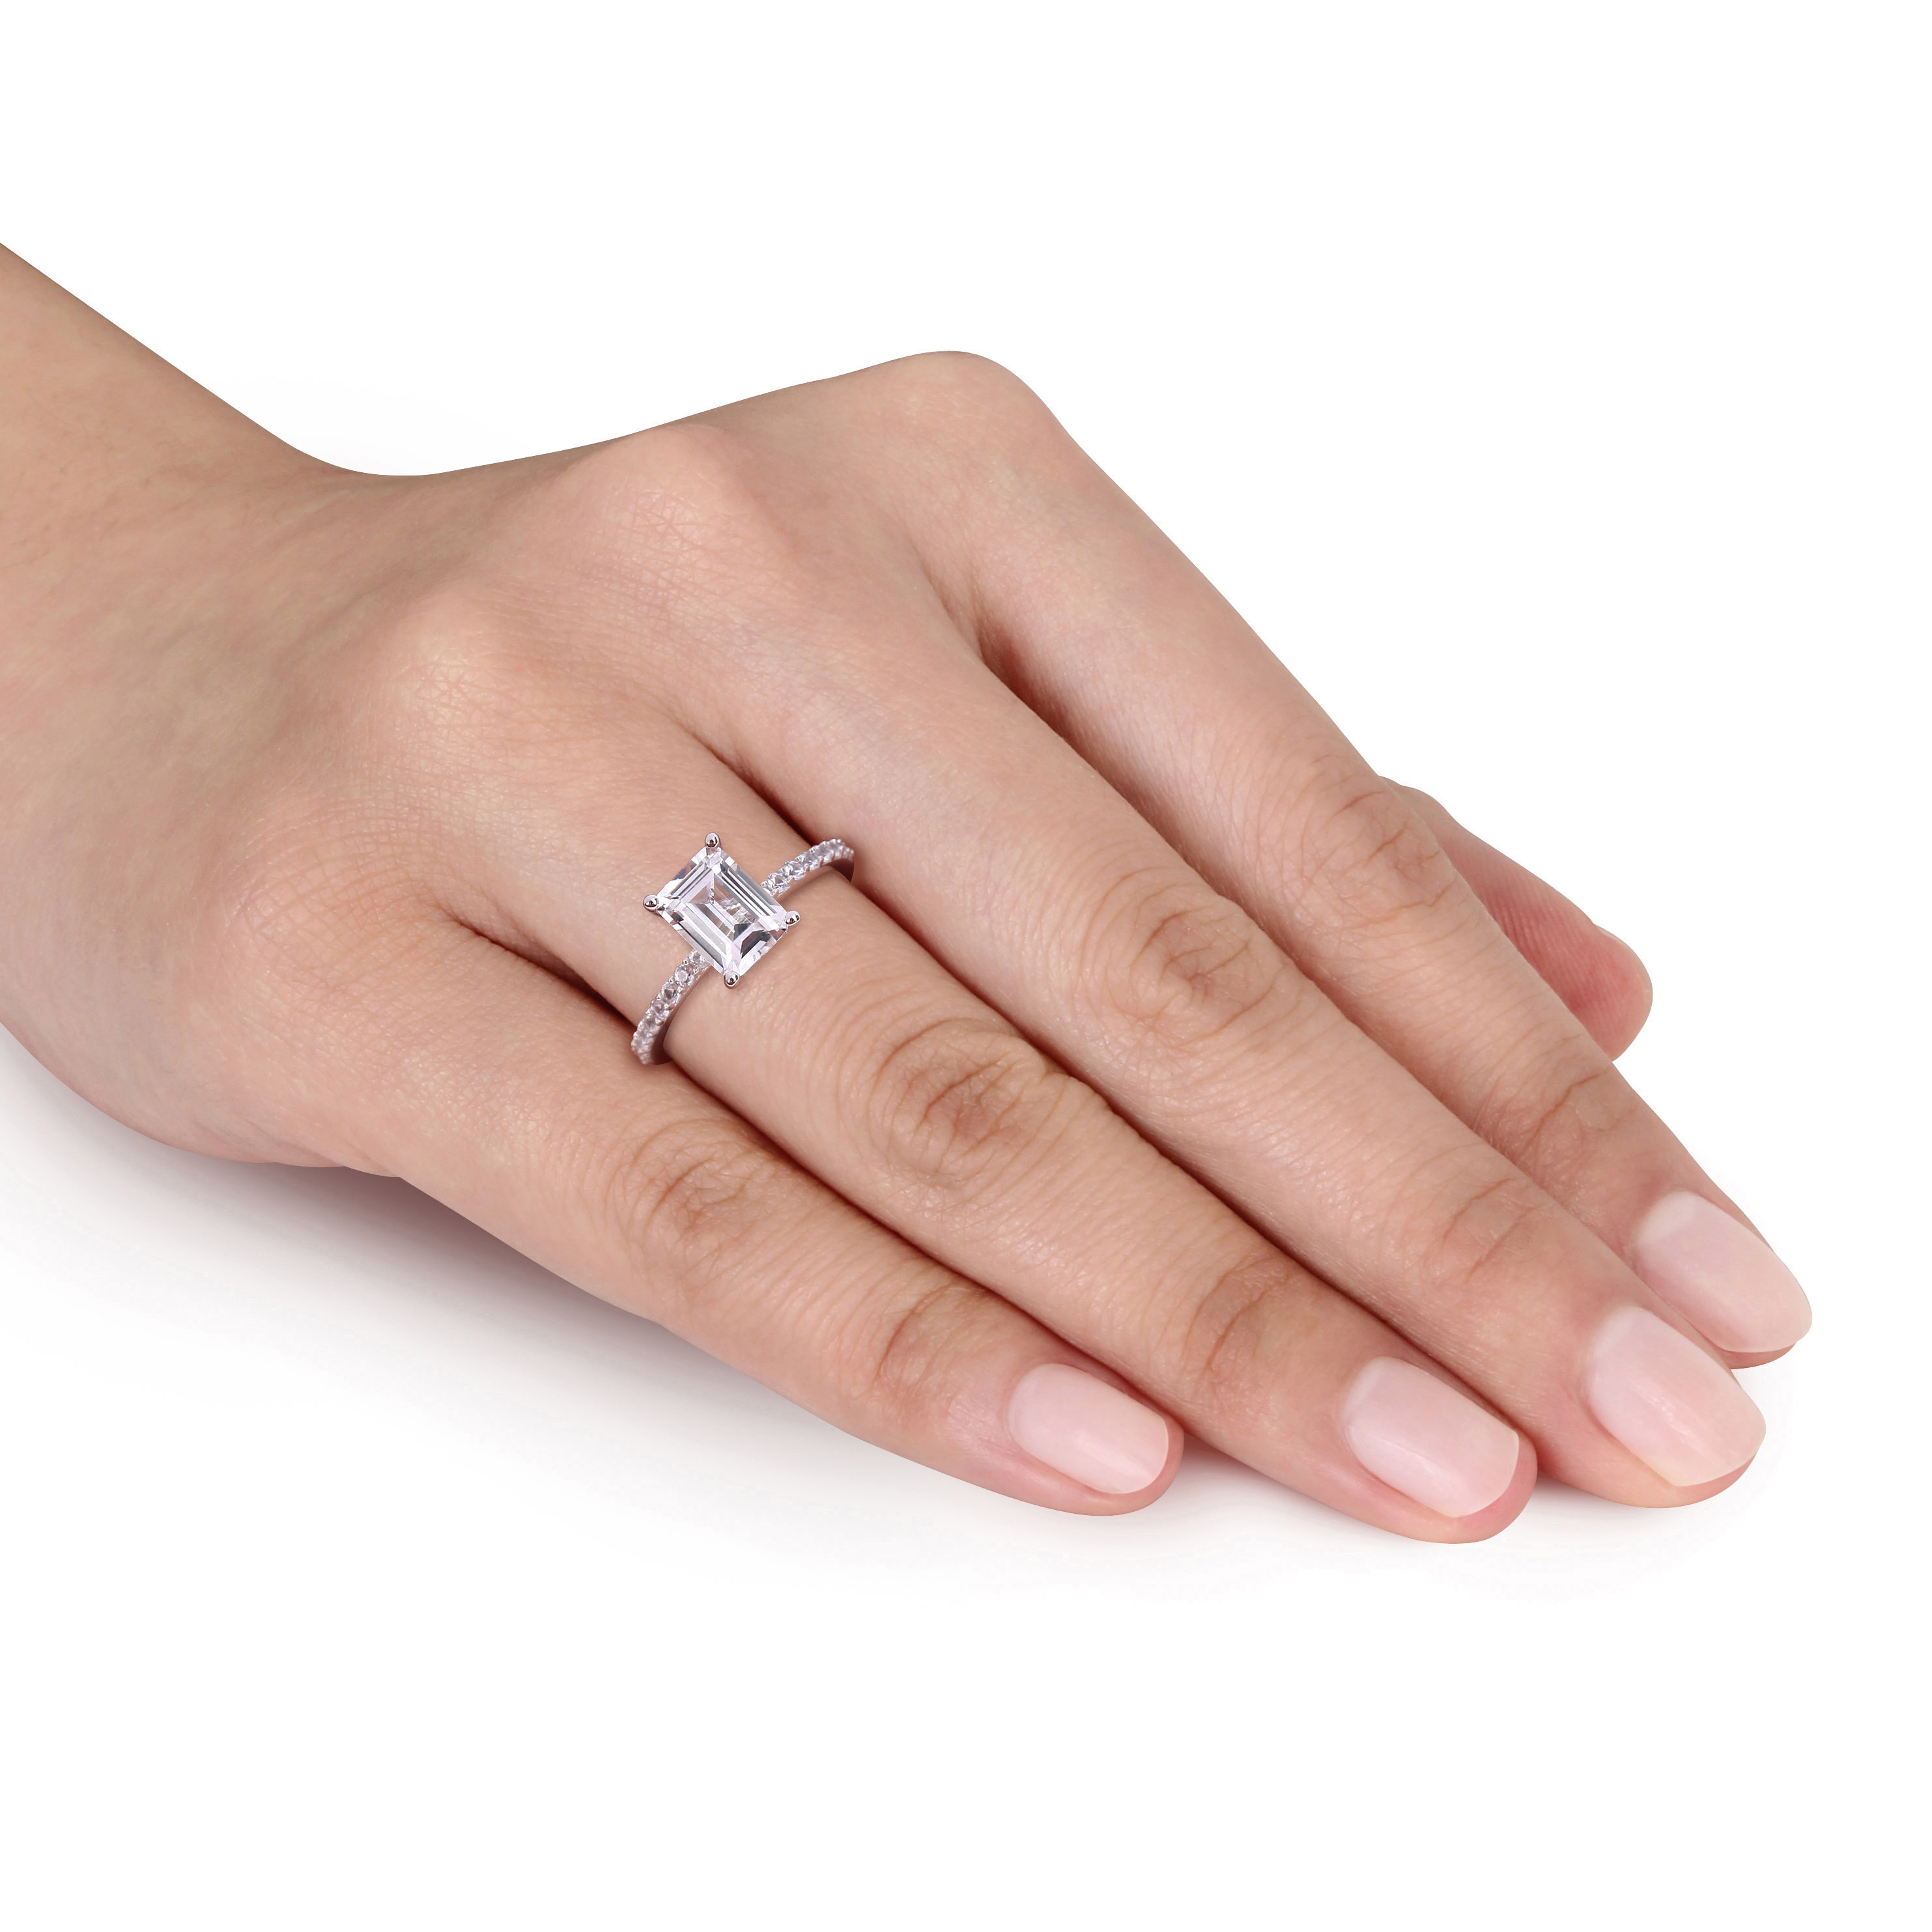 2 1/3 CT TGW Emerald Cut Created White Sapphire Solitaire Engagement Ring in 10k White Gold